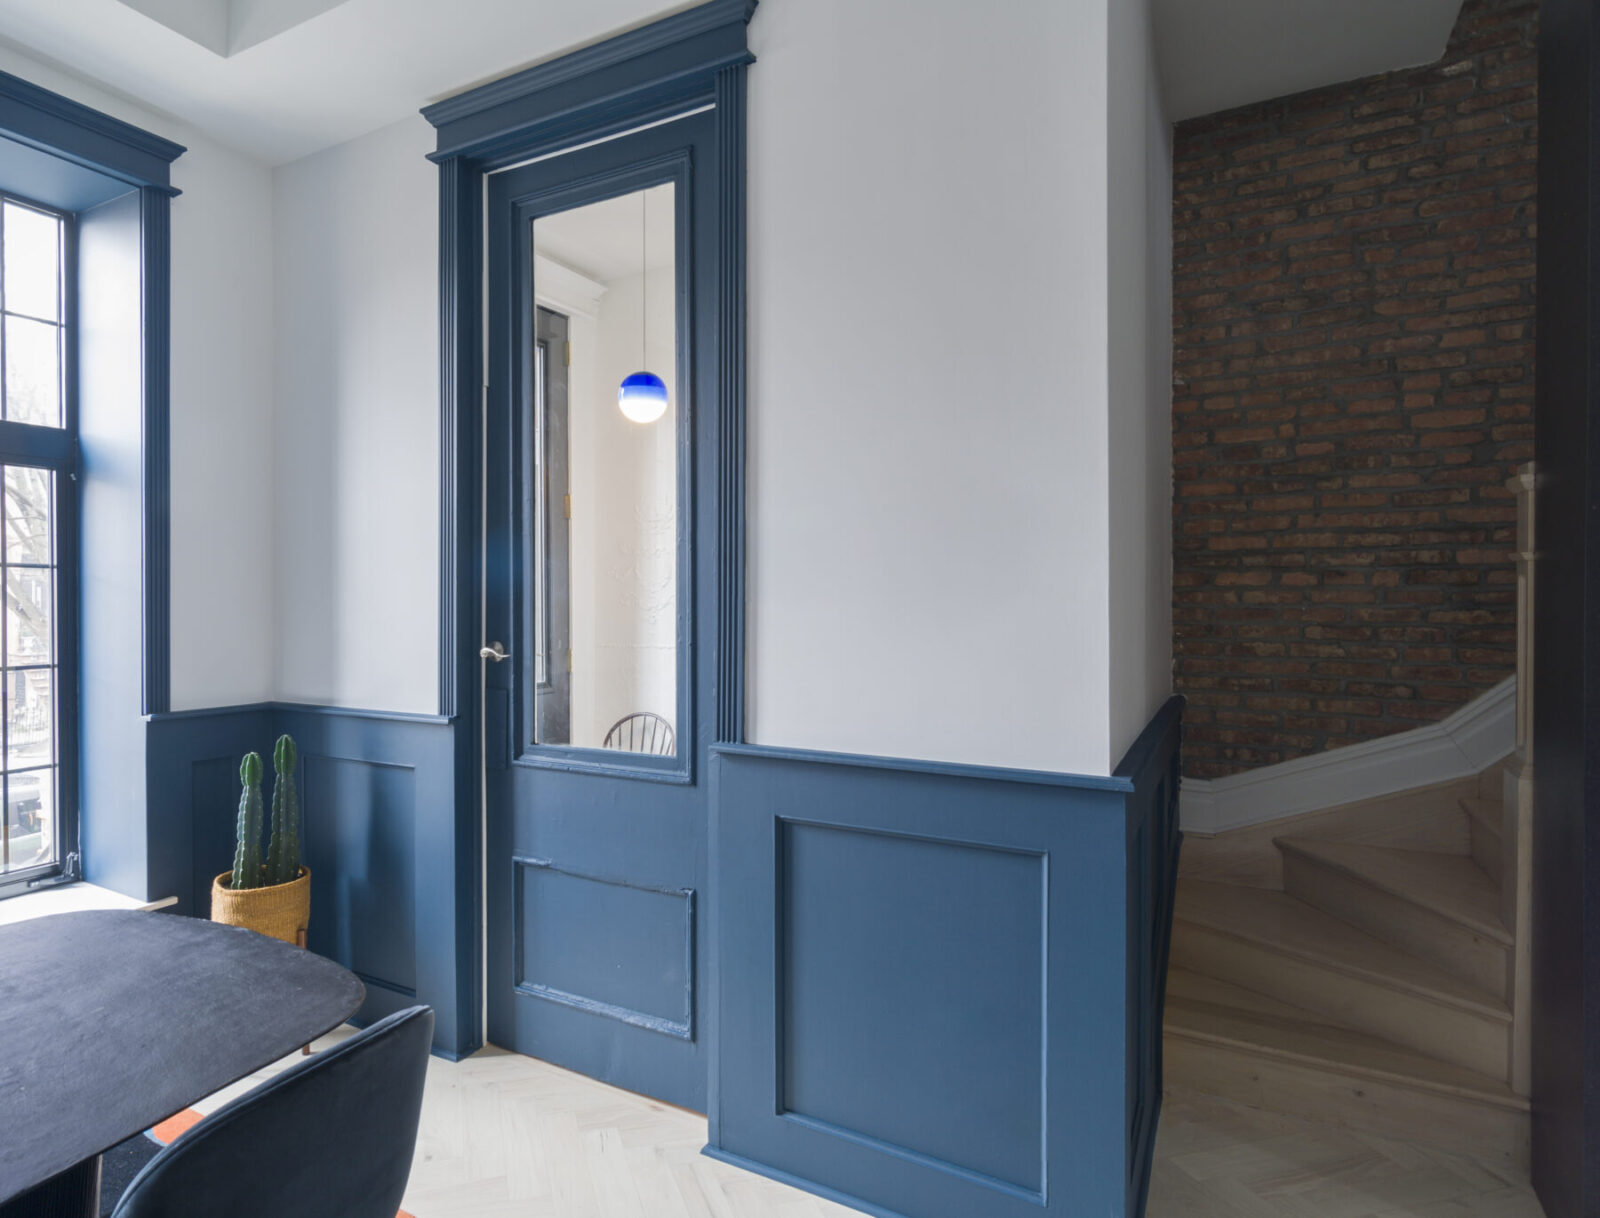 Archisearch Olbos Studio renovates a Bed-Stuy townhouse with elegant playfulness